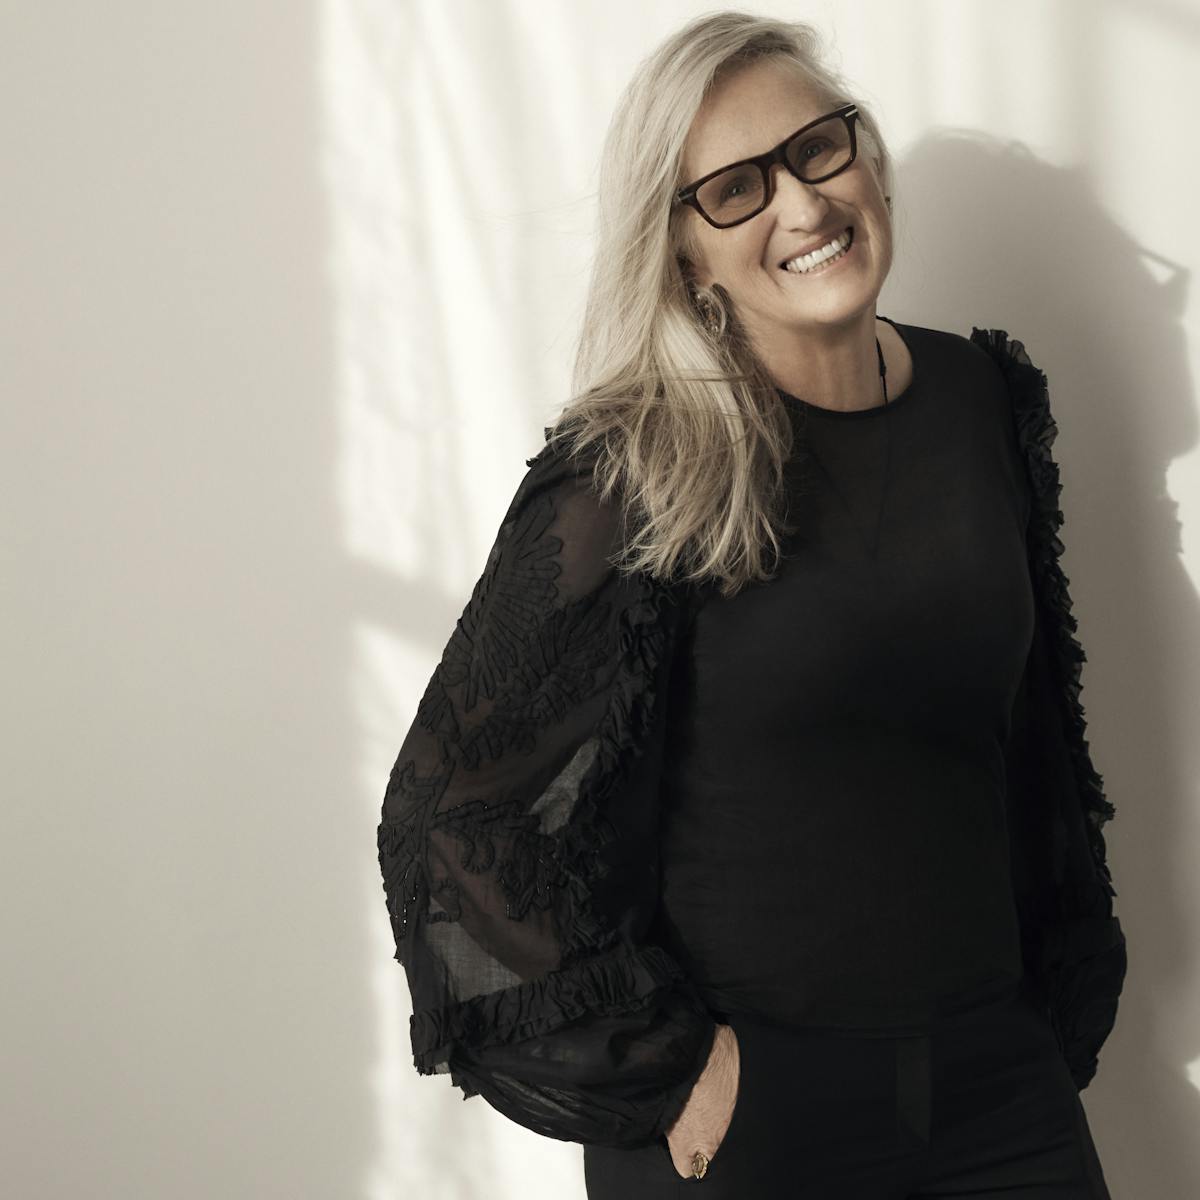 Jane Campion wears an all-black outfit and chunky black glasses. She leans again a white wall.